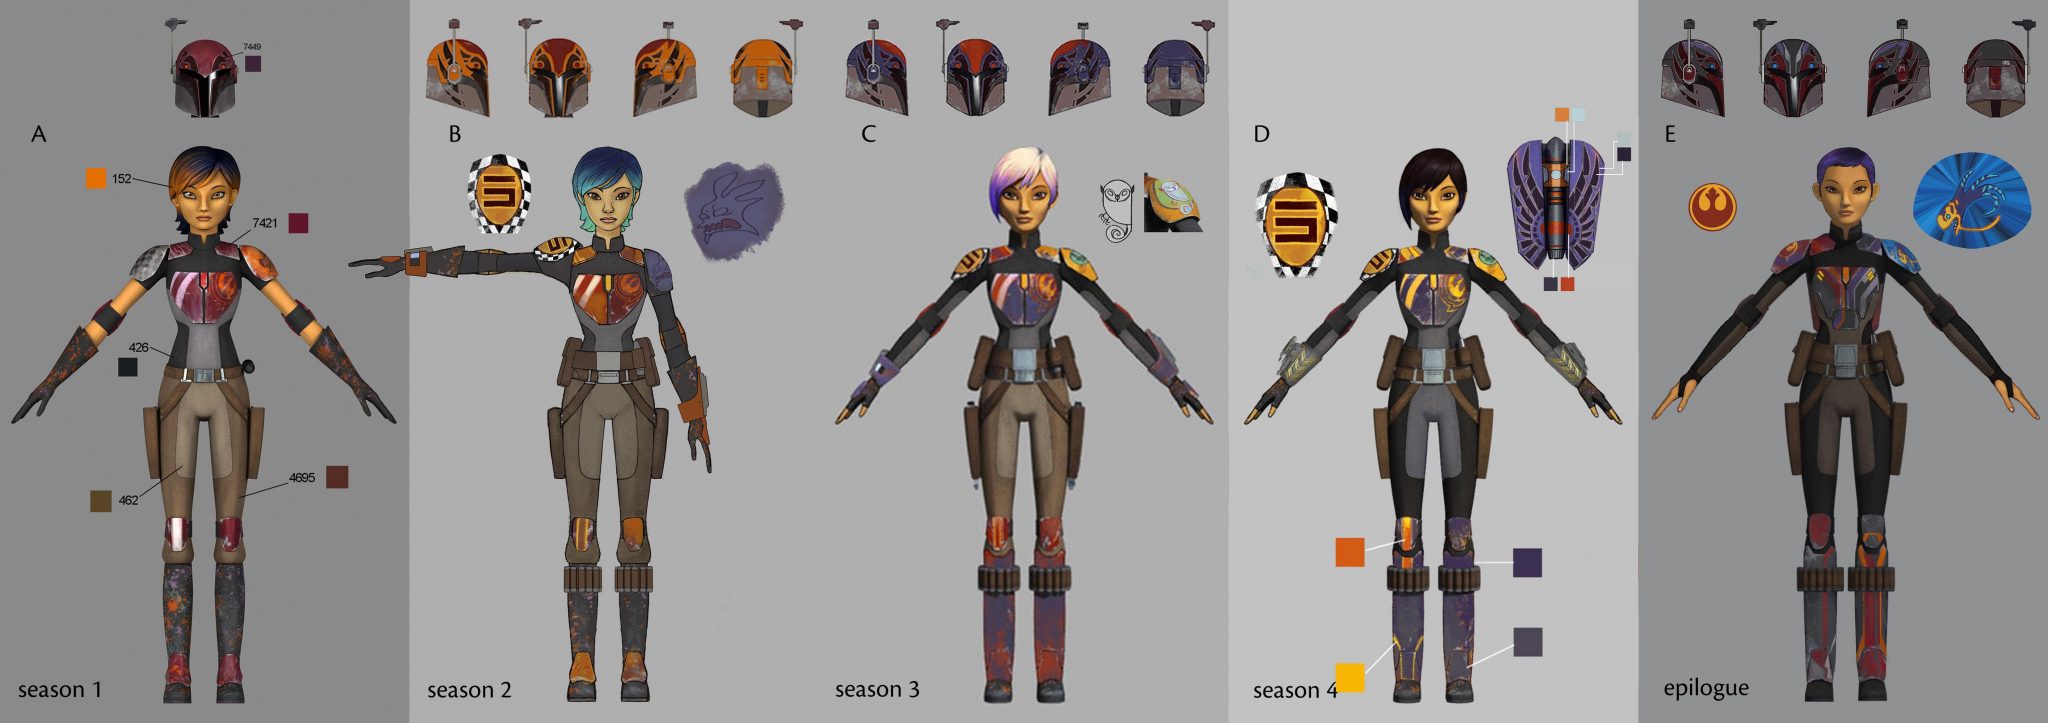 Sabine had a mission gear look which included armored gauntlets, ammo strap...